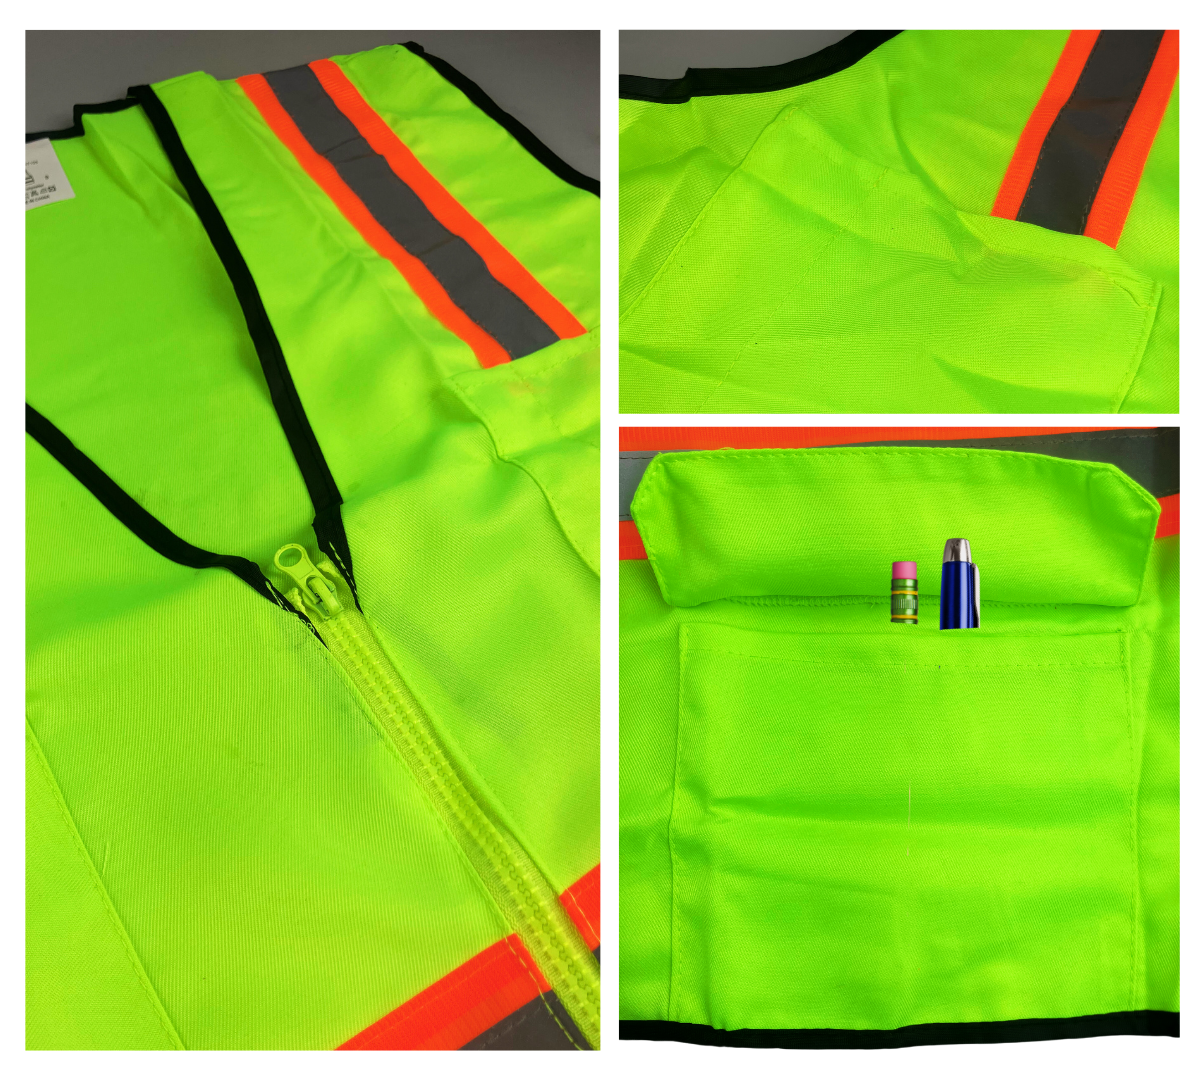 Bright Neon Green Safety Vest With Reflective Stripes Adult Size 5X Large  - SF-33718